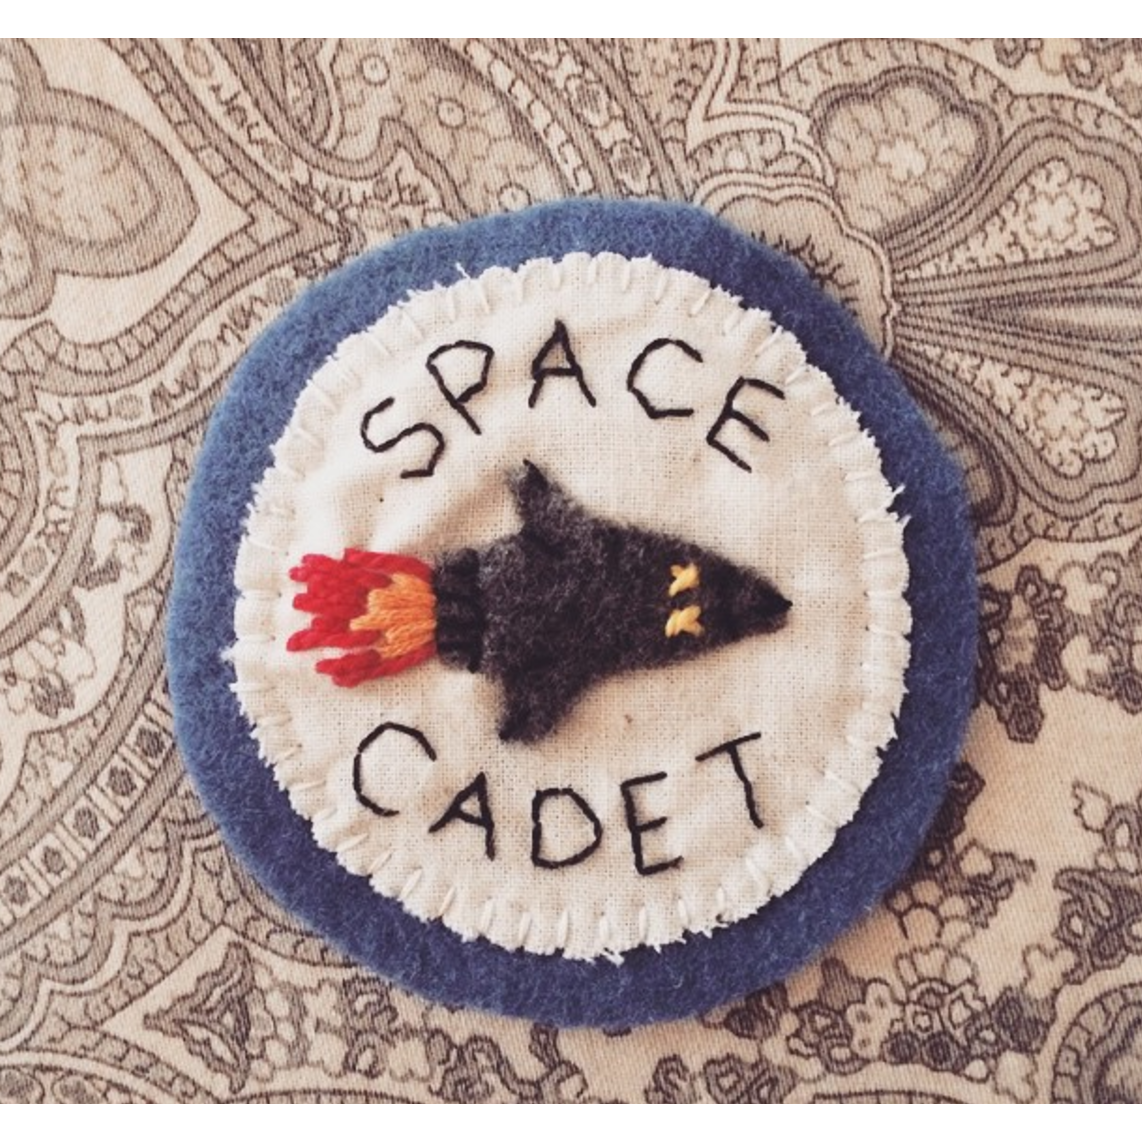 How to Make Embroidered Patches